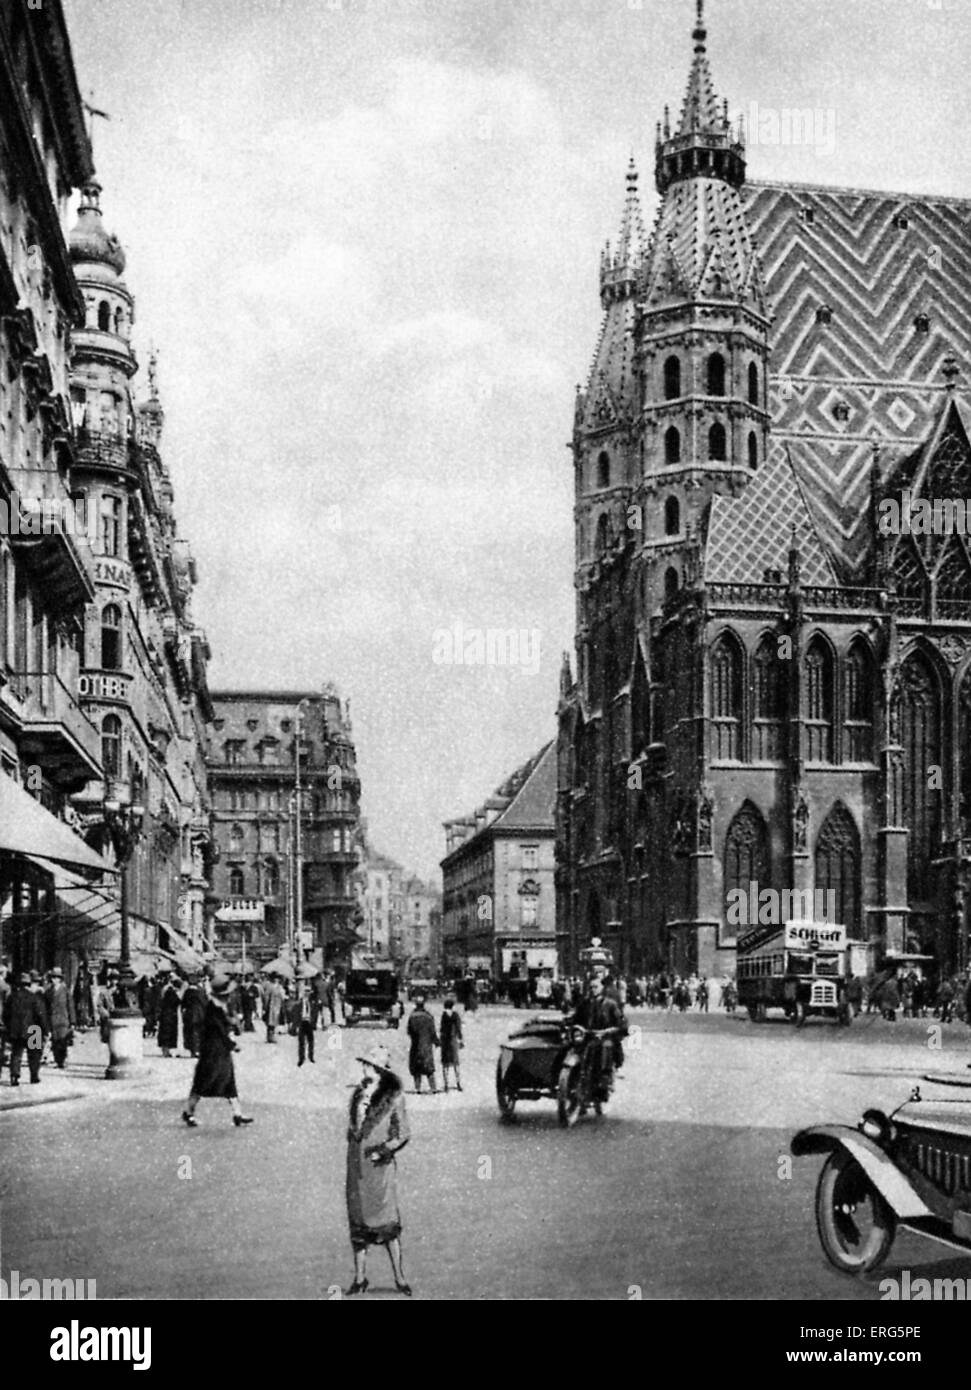 St Stephen's square (Stephansplatz), Vienna, Austria. View of the cathedral square from the Graben street (der Graben, literally 'the trench'). 1920s, street scene. Square in the geographical centre of city. Stock Photo